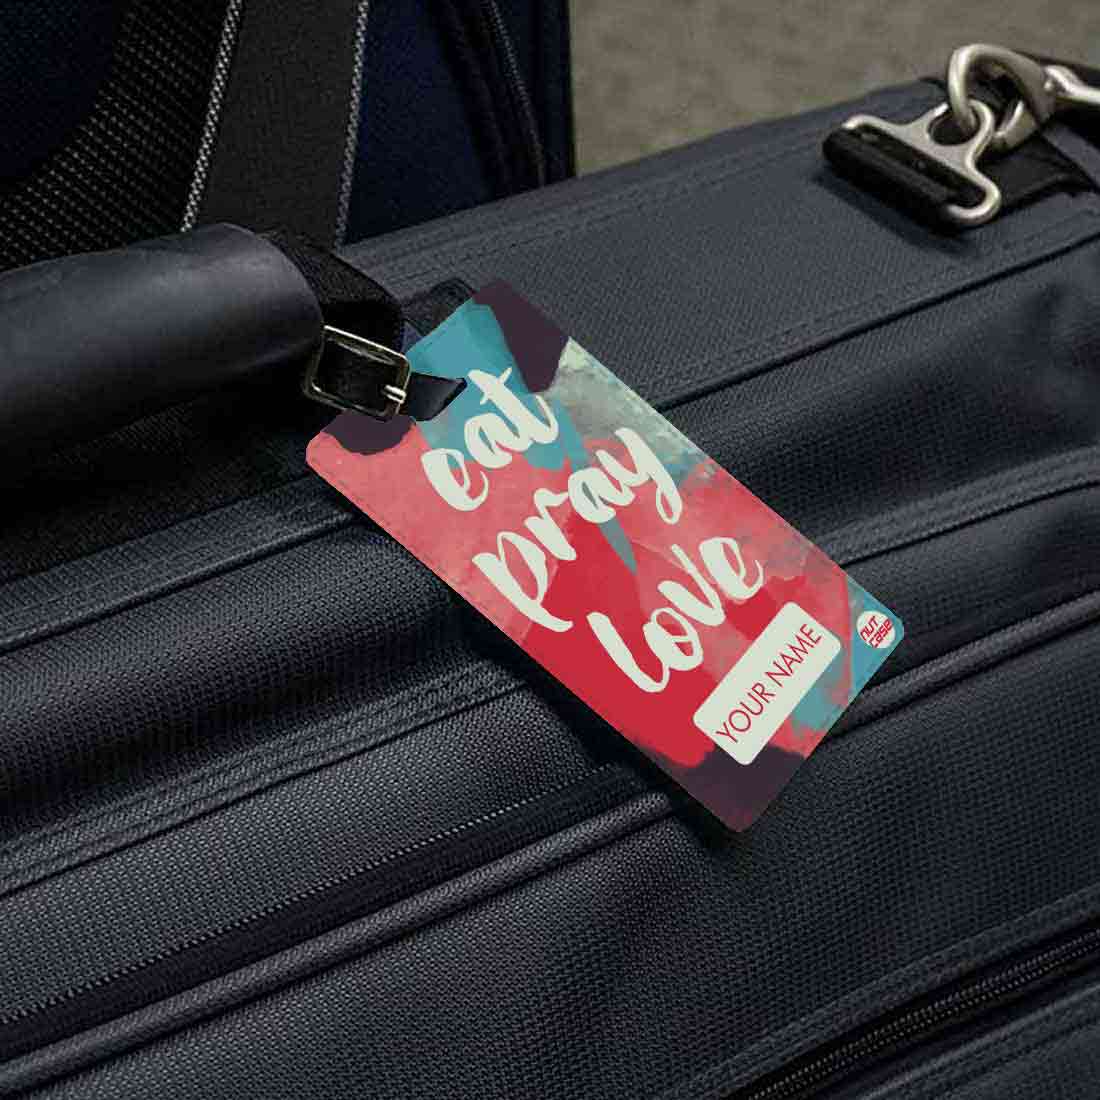 Custom Luggage Tags Add Name Ideal for Travel Set of 2 - Eat Pray Love